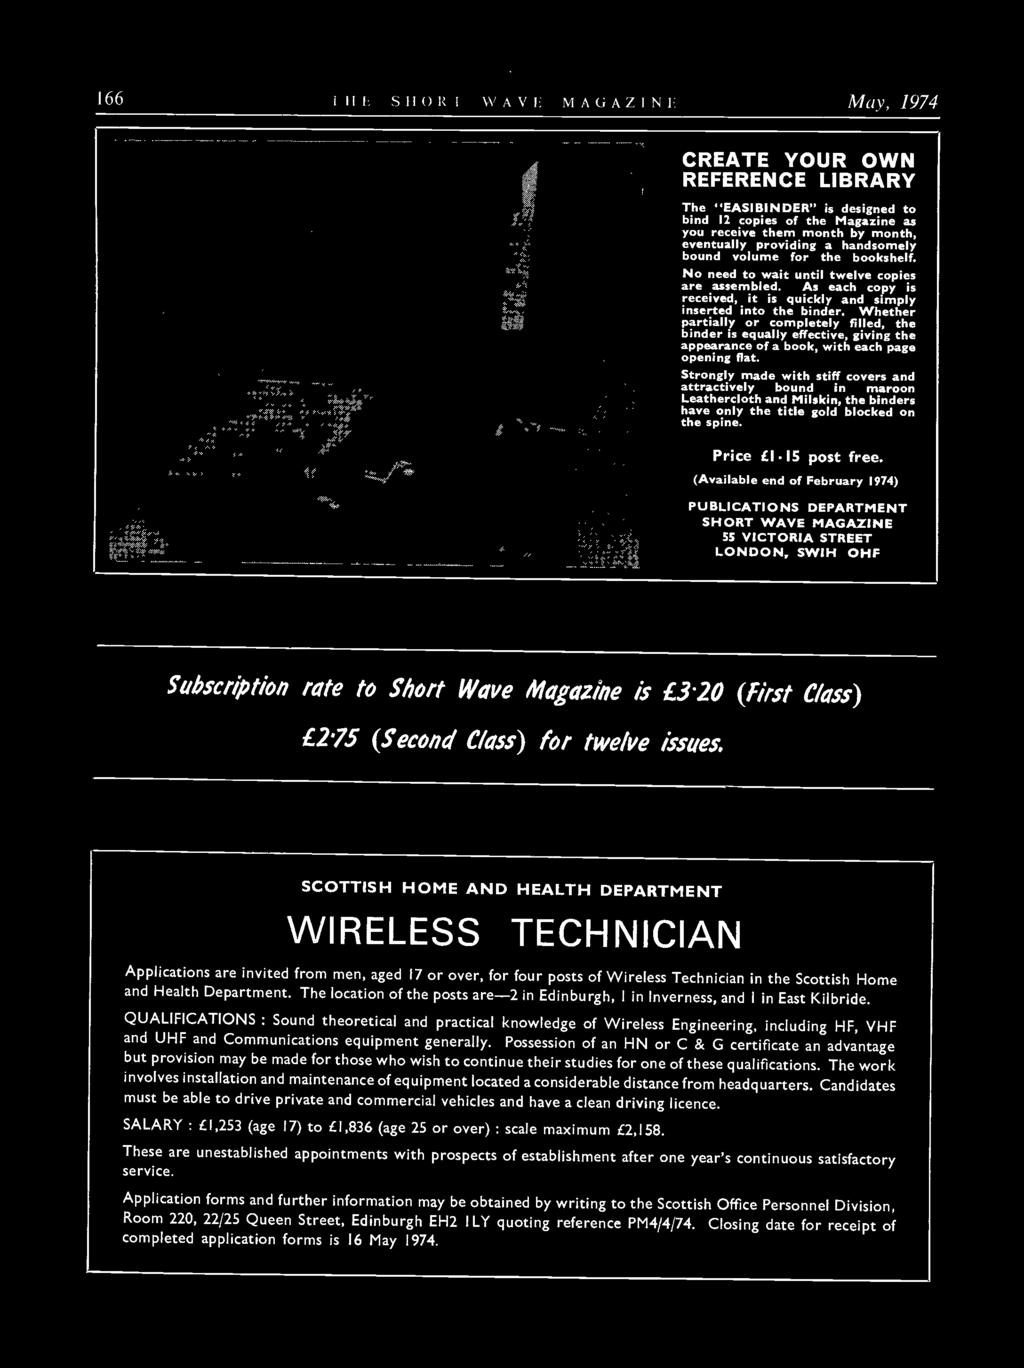 (Available end of February 1974) PUBLICATIONS DEPARTMENT SHORT WAVE MAGAZINE SS VICTORIA STREET LONDON, SWIH OHF Subscription rate to Short Wave Magazine is.3.20 (first Class) a7.